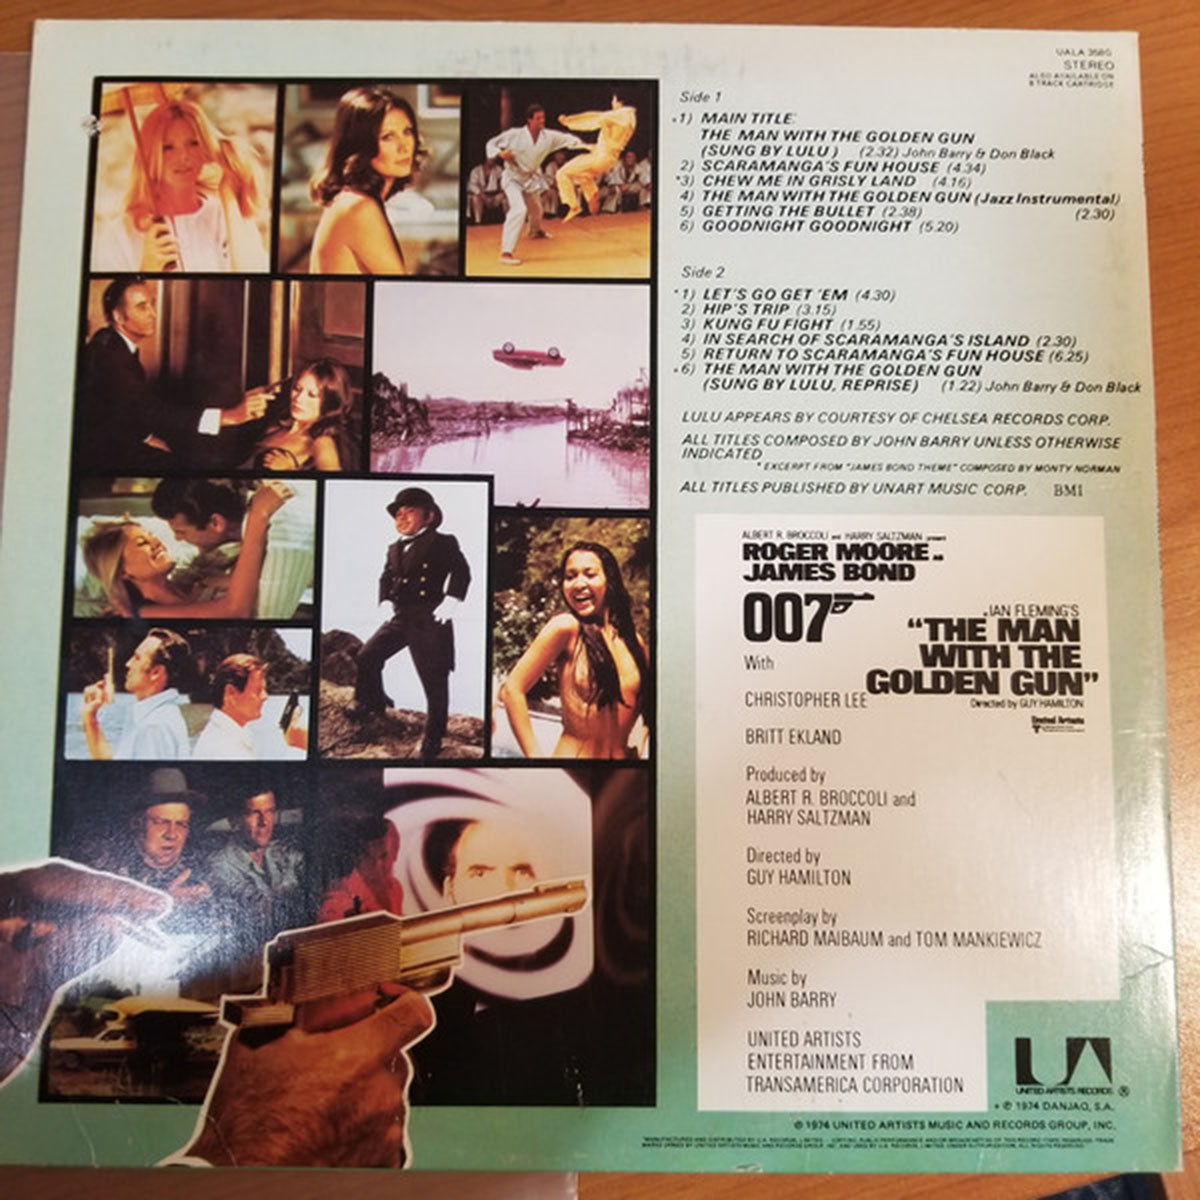 The Man with the Golden Gun - Soundtrack - US Pressing